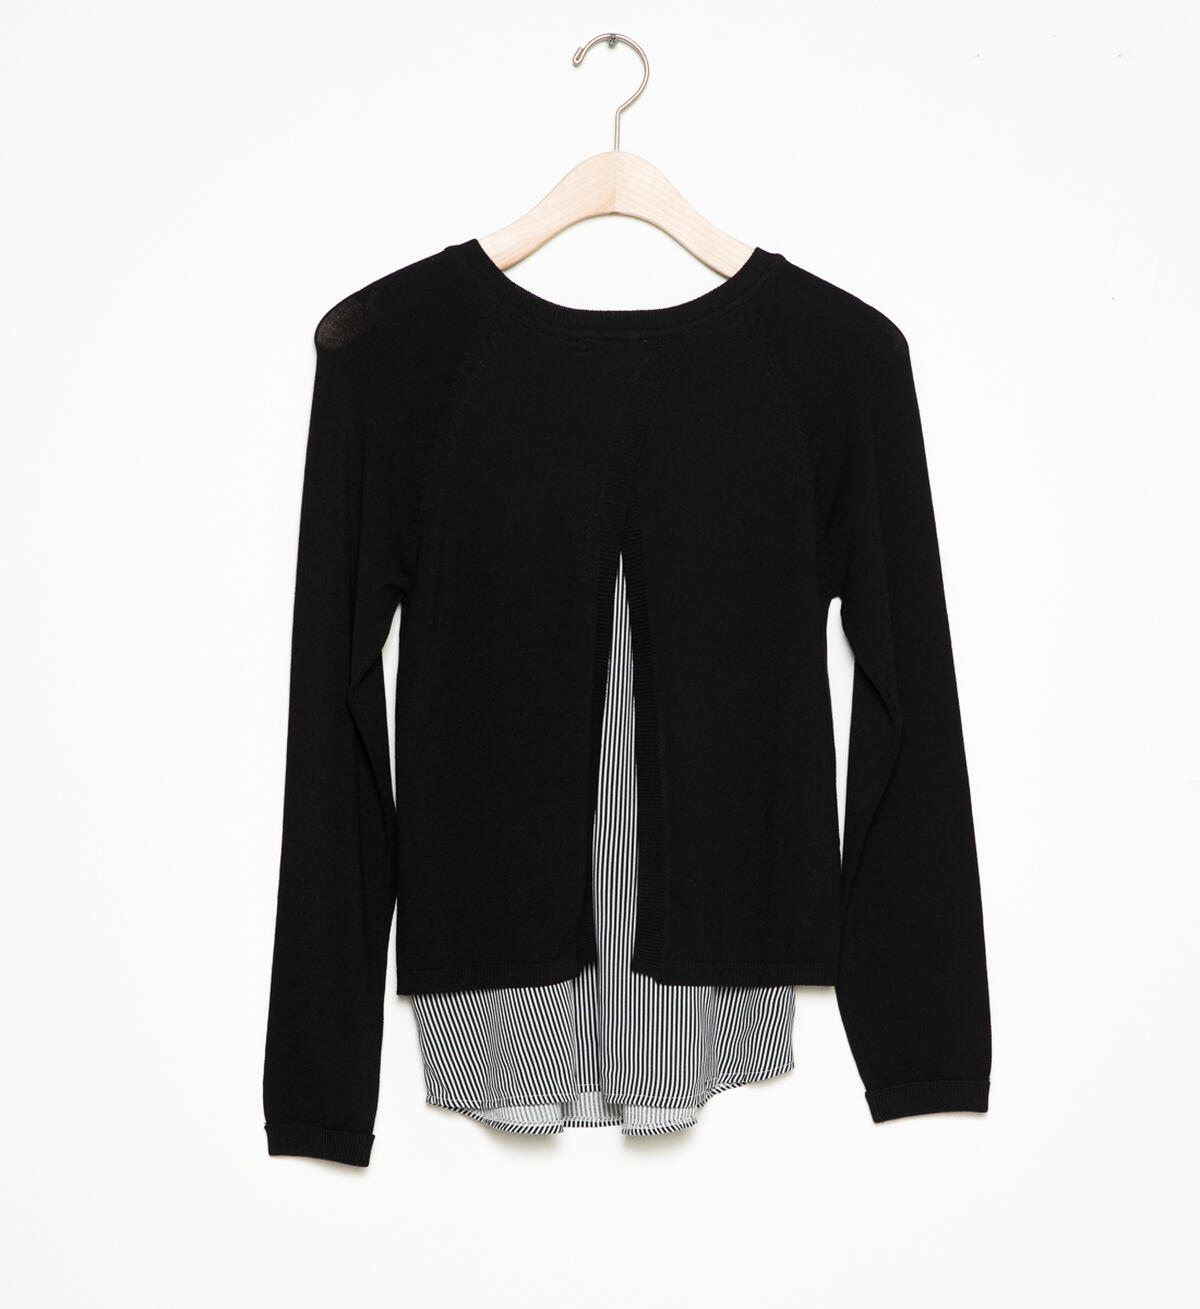 Long-Sleeve Layered Sweater (7-16), , hi-res image number 1